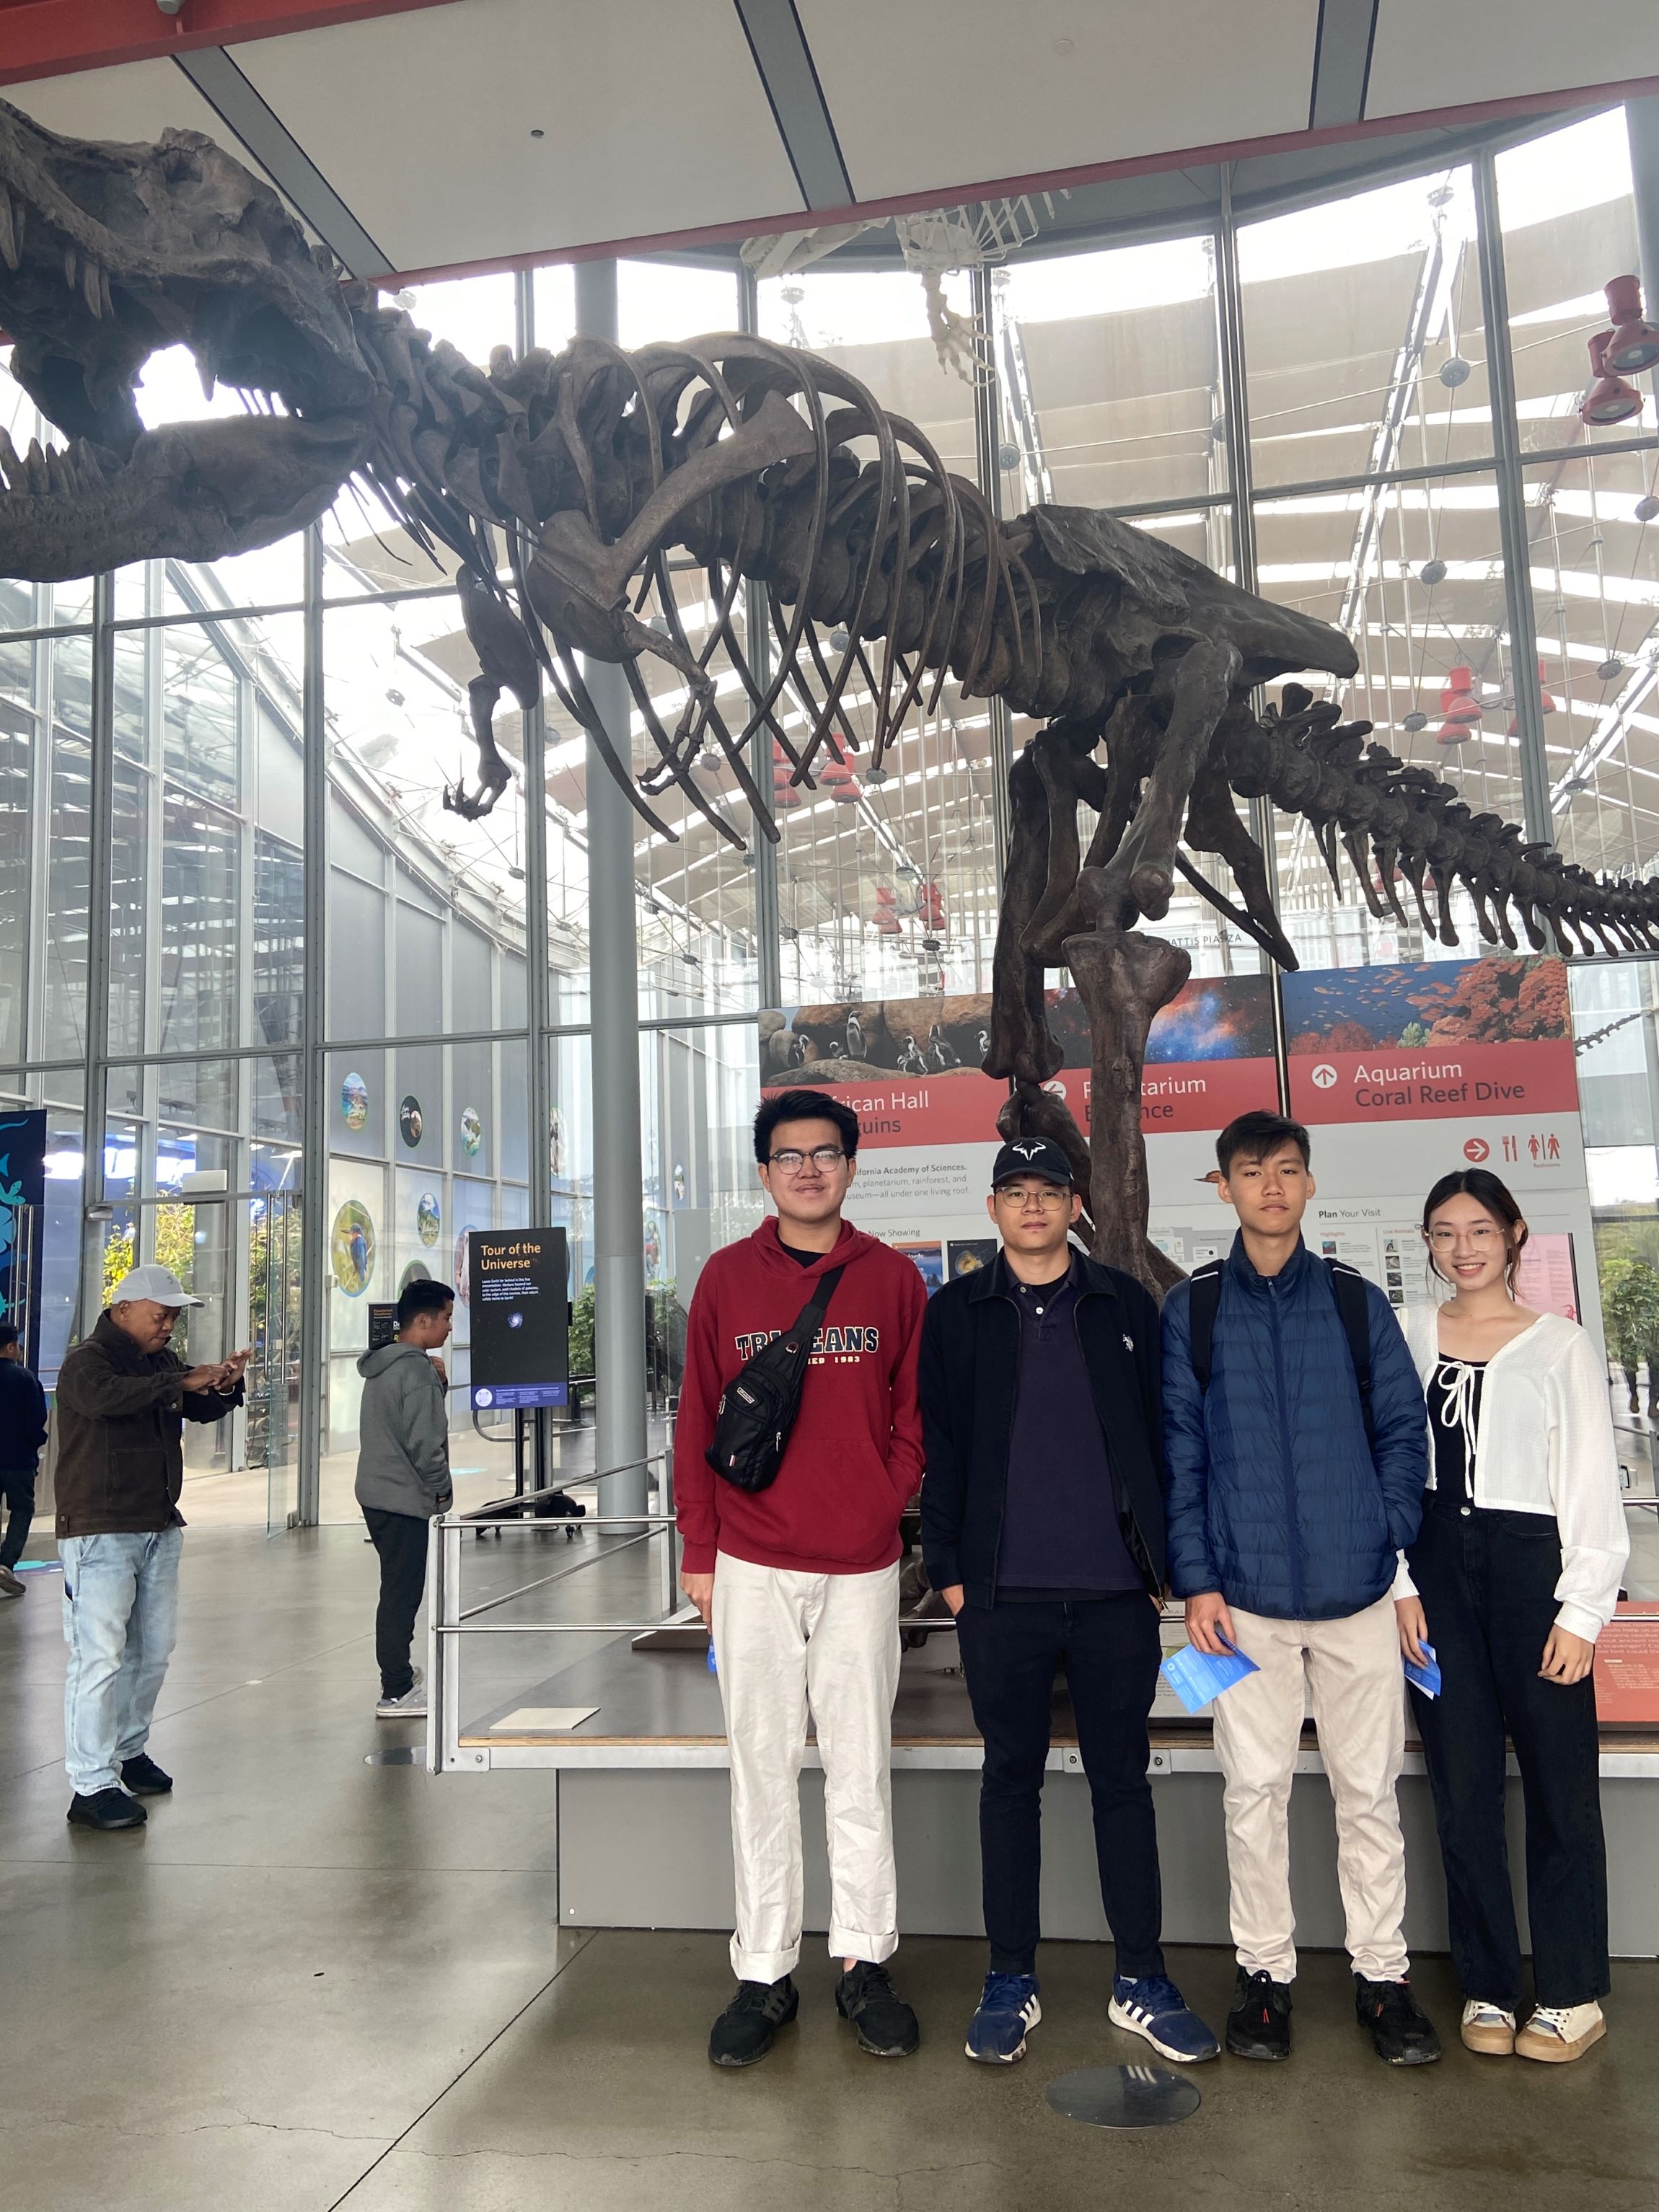 Fulbright students visited a local museum during the weekend, Silicon Valley, California, USA